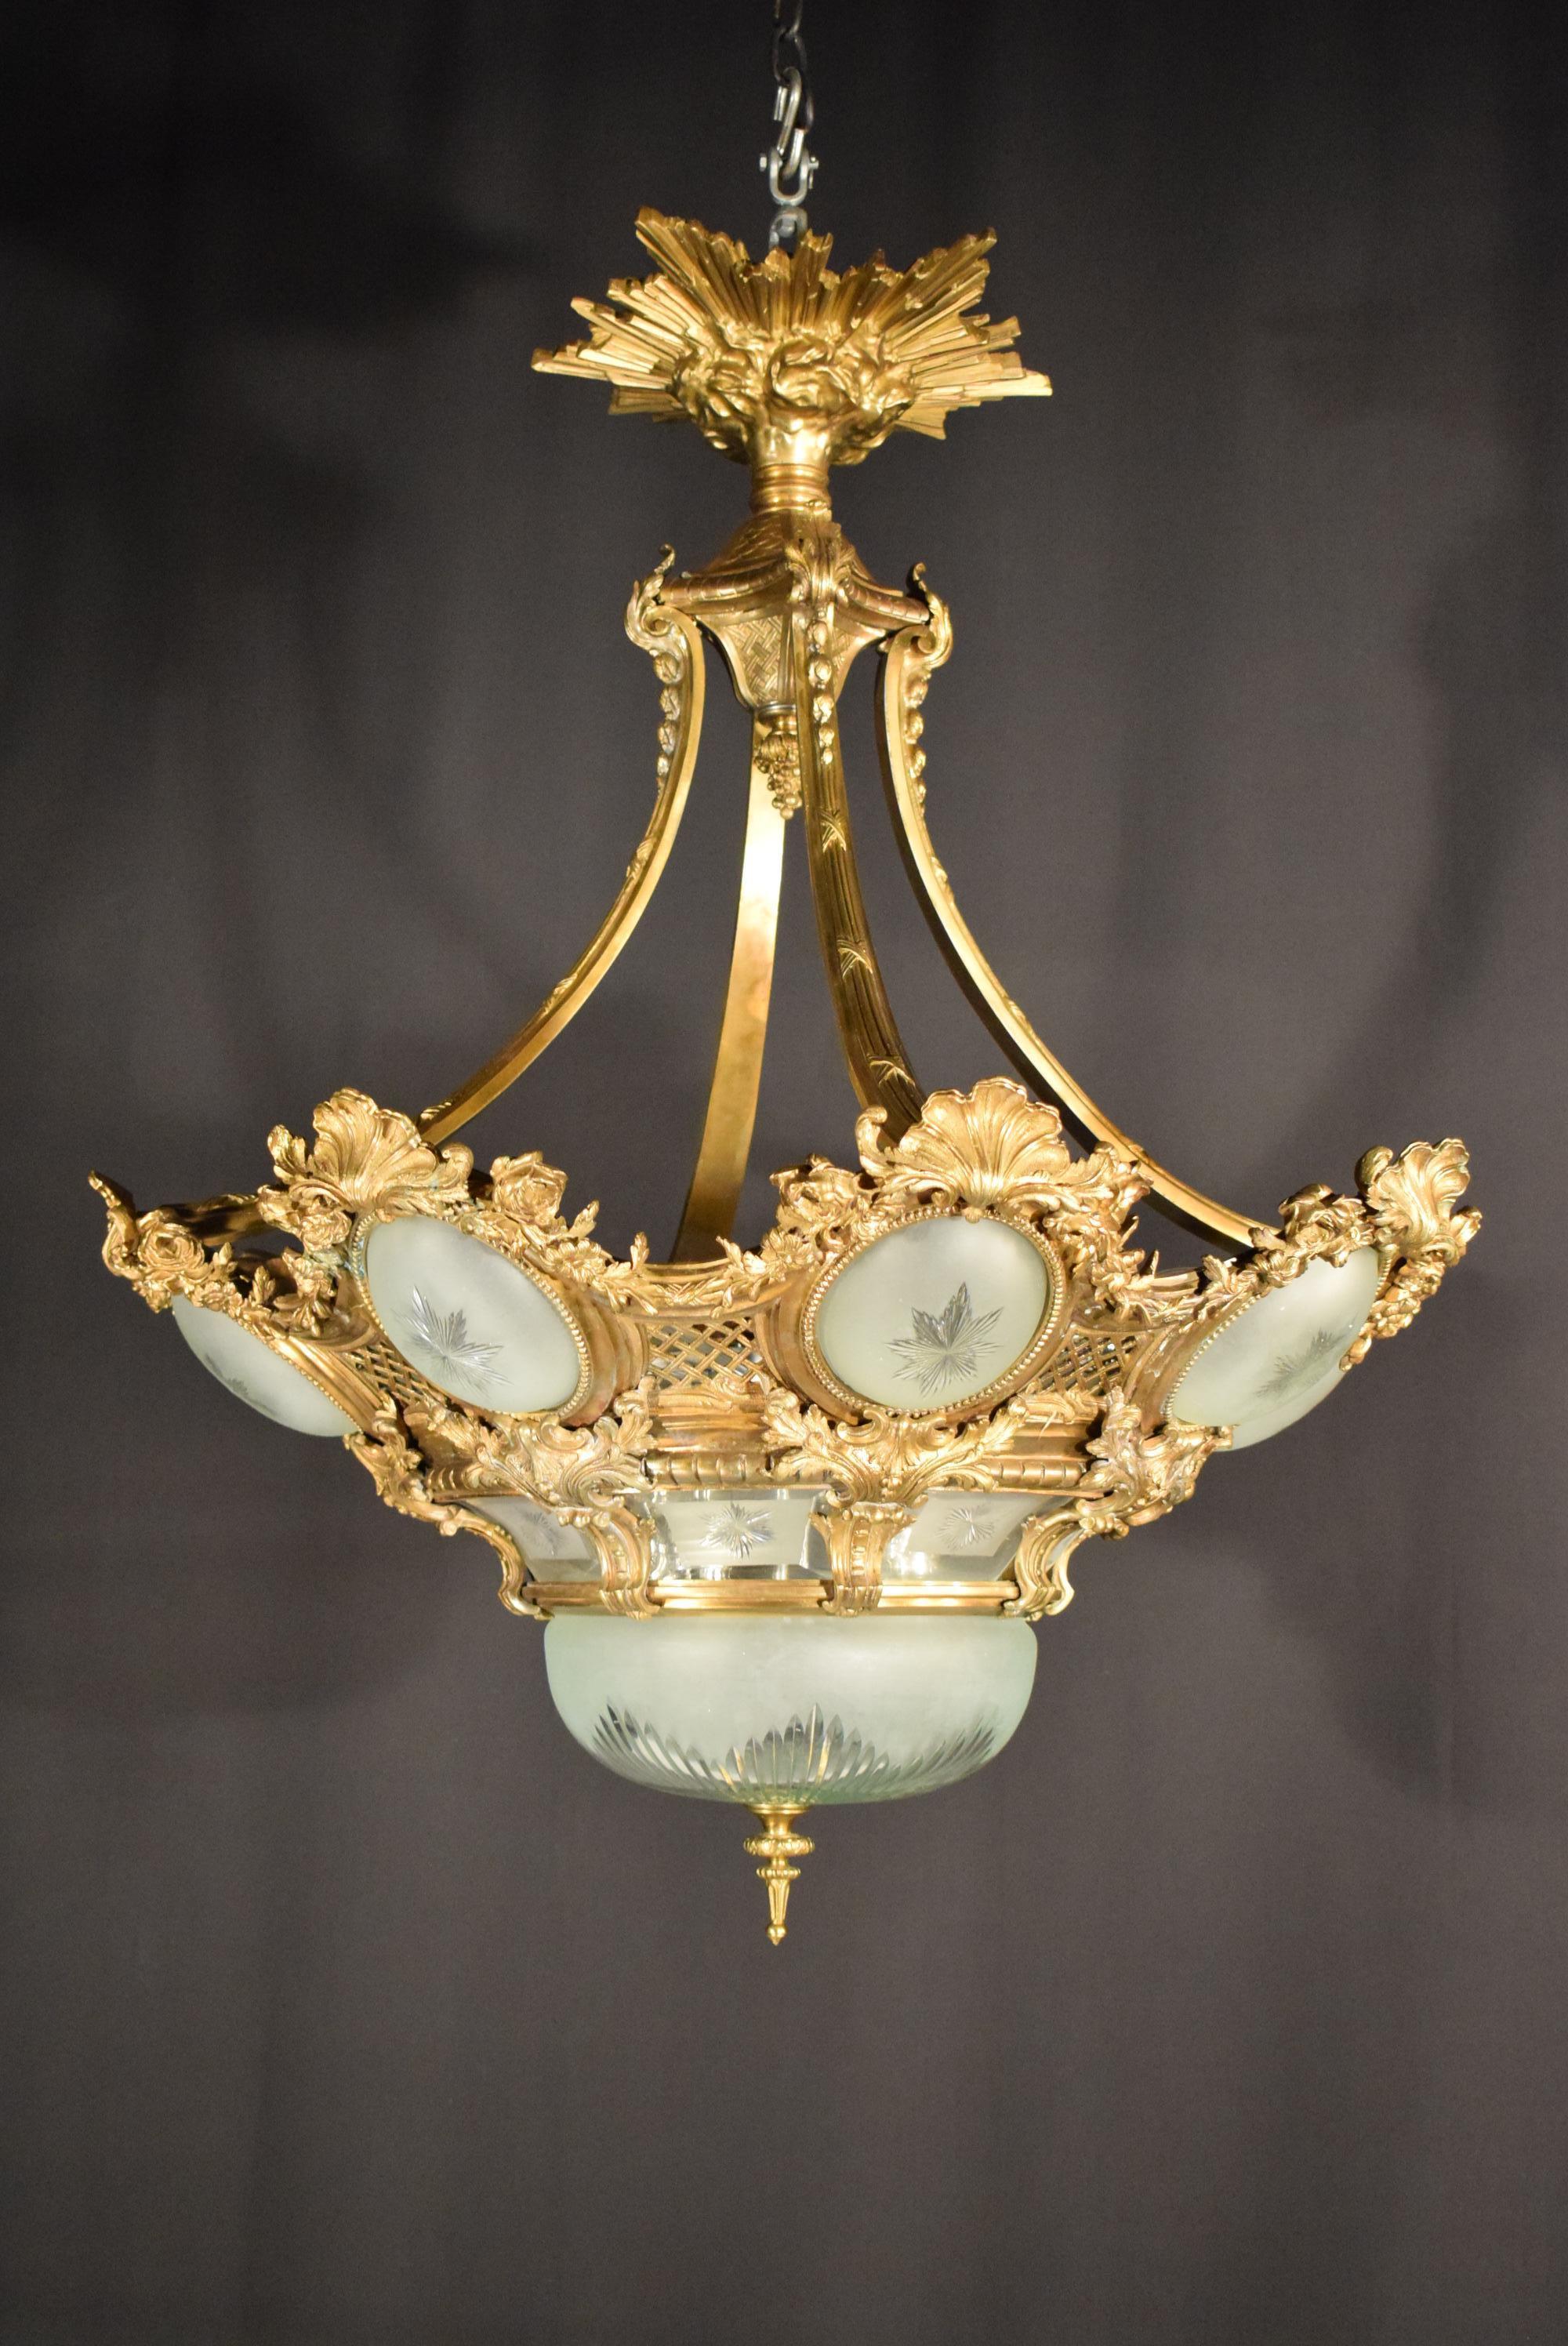 A very fine gilt bronze and crystal chandelier in the Regence style. The top depicting sun rays and clouds resting on a box that issues four arms that hold the body of the chandelier. The body of the chandelier features eight circular reserves (with